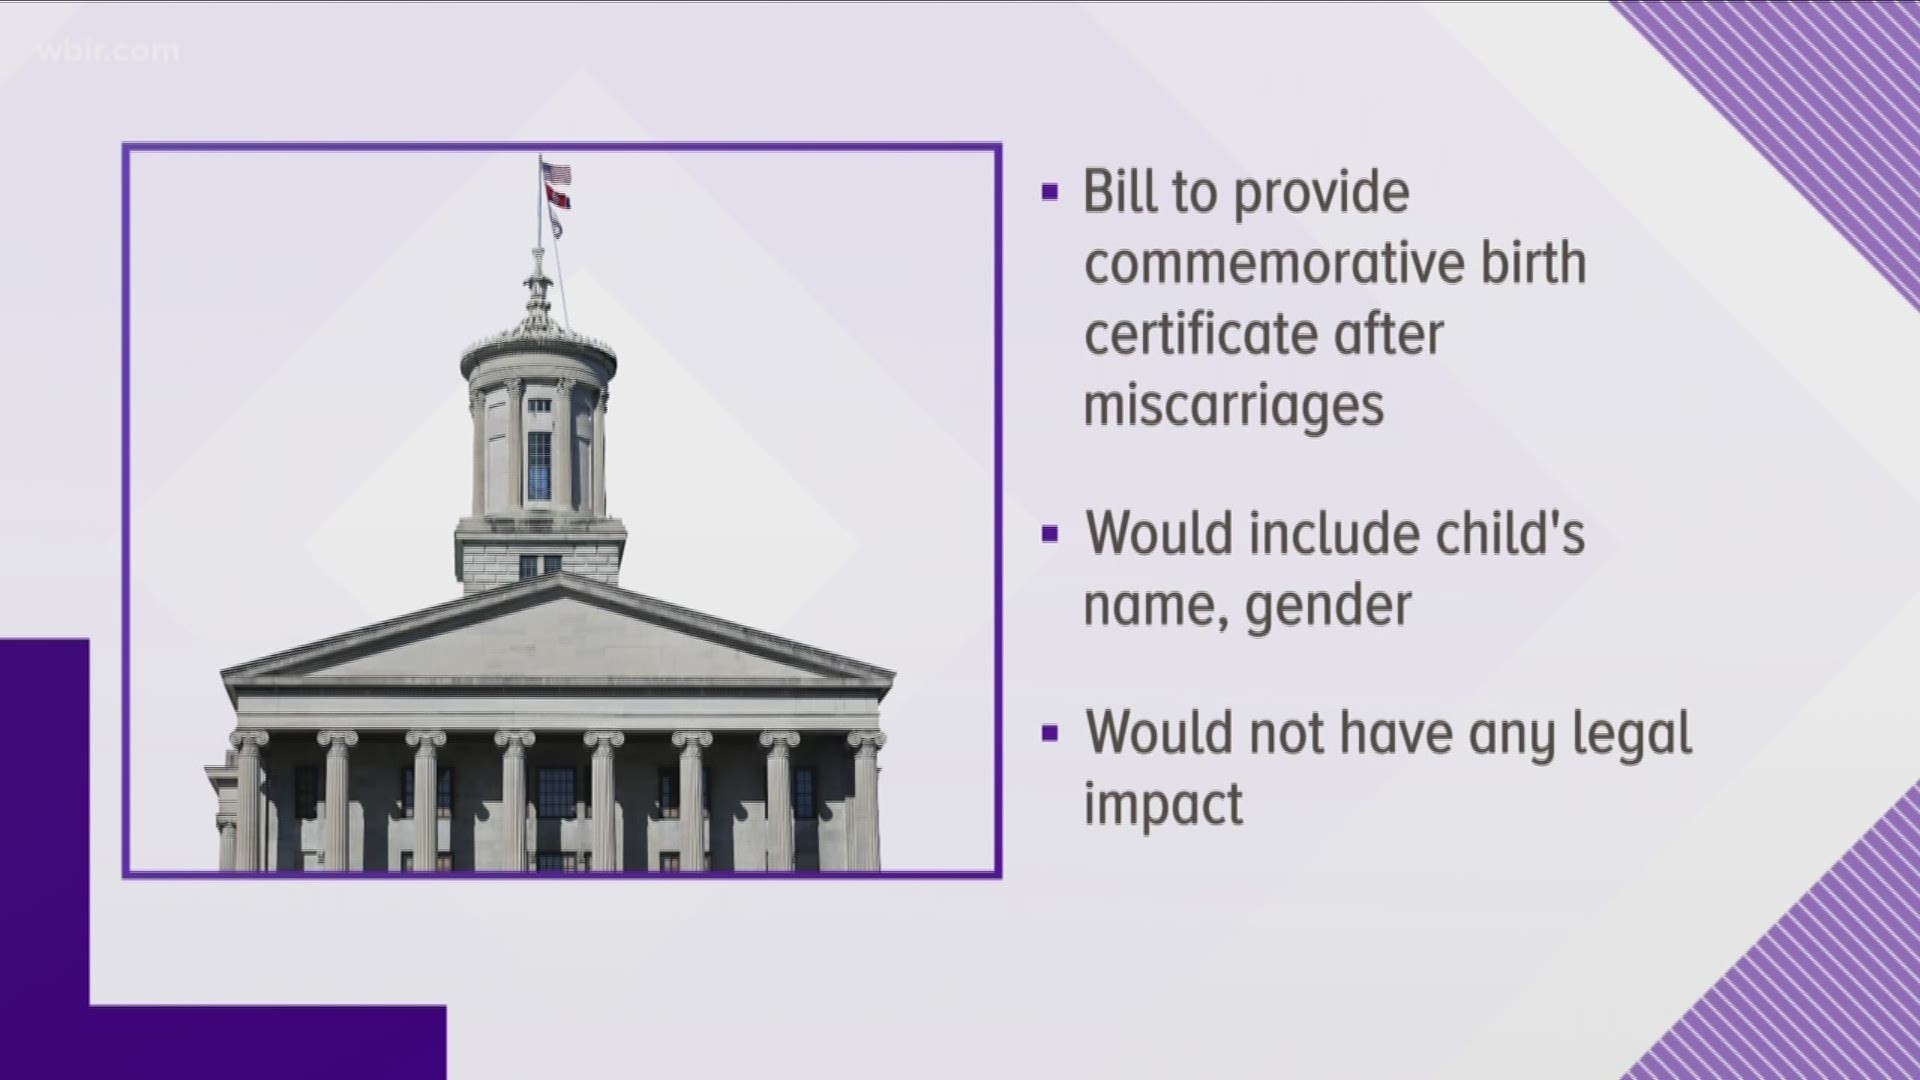 The bill would allow grieving parents who have lost a baby to miscarriage to request a commemorative birth certificate.